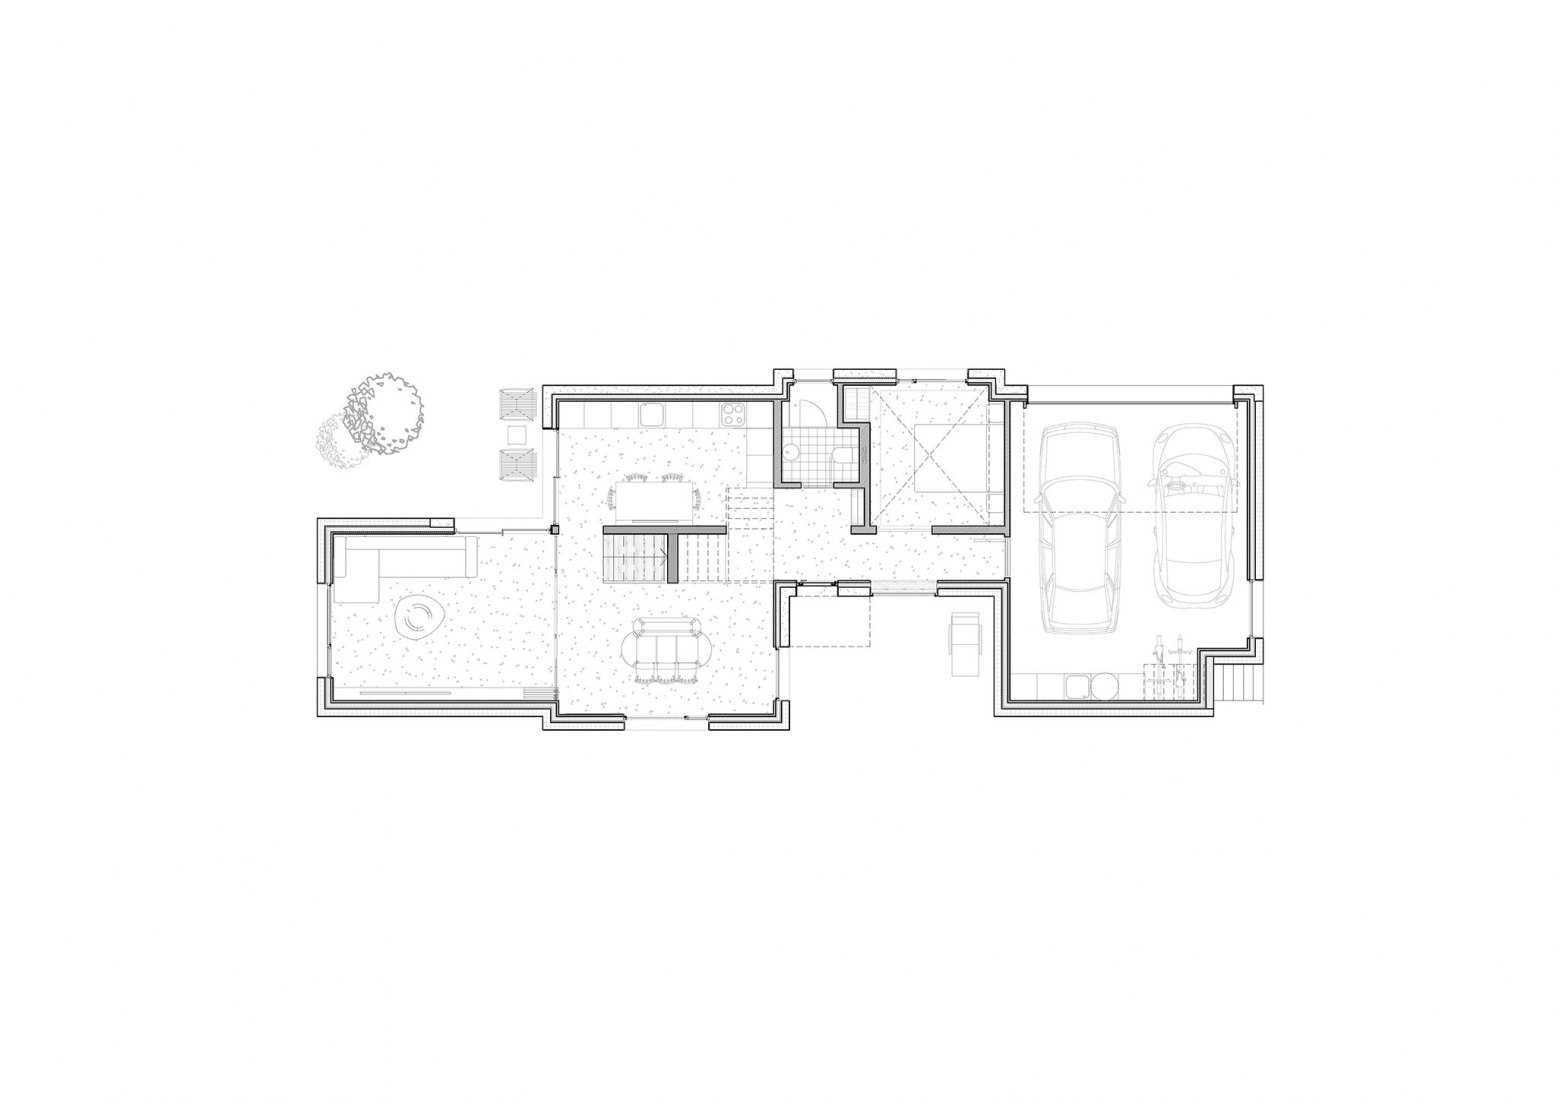 Introvert dwelling. Neruca house by Sukunfuku studio | The Strength of ...